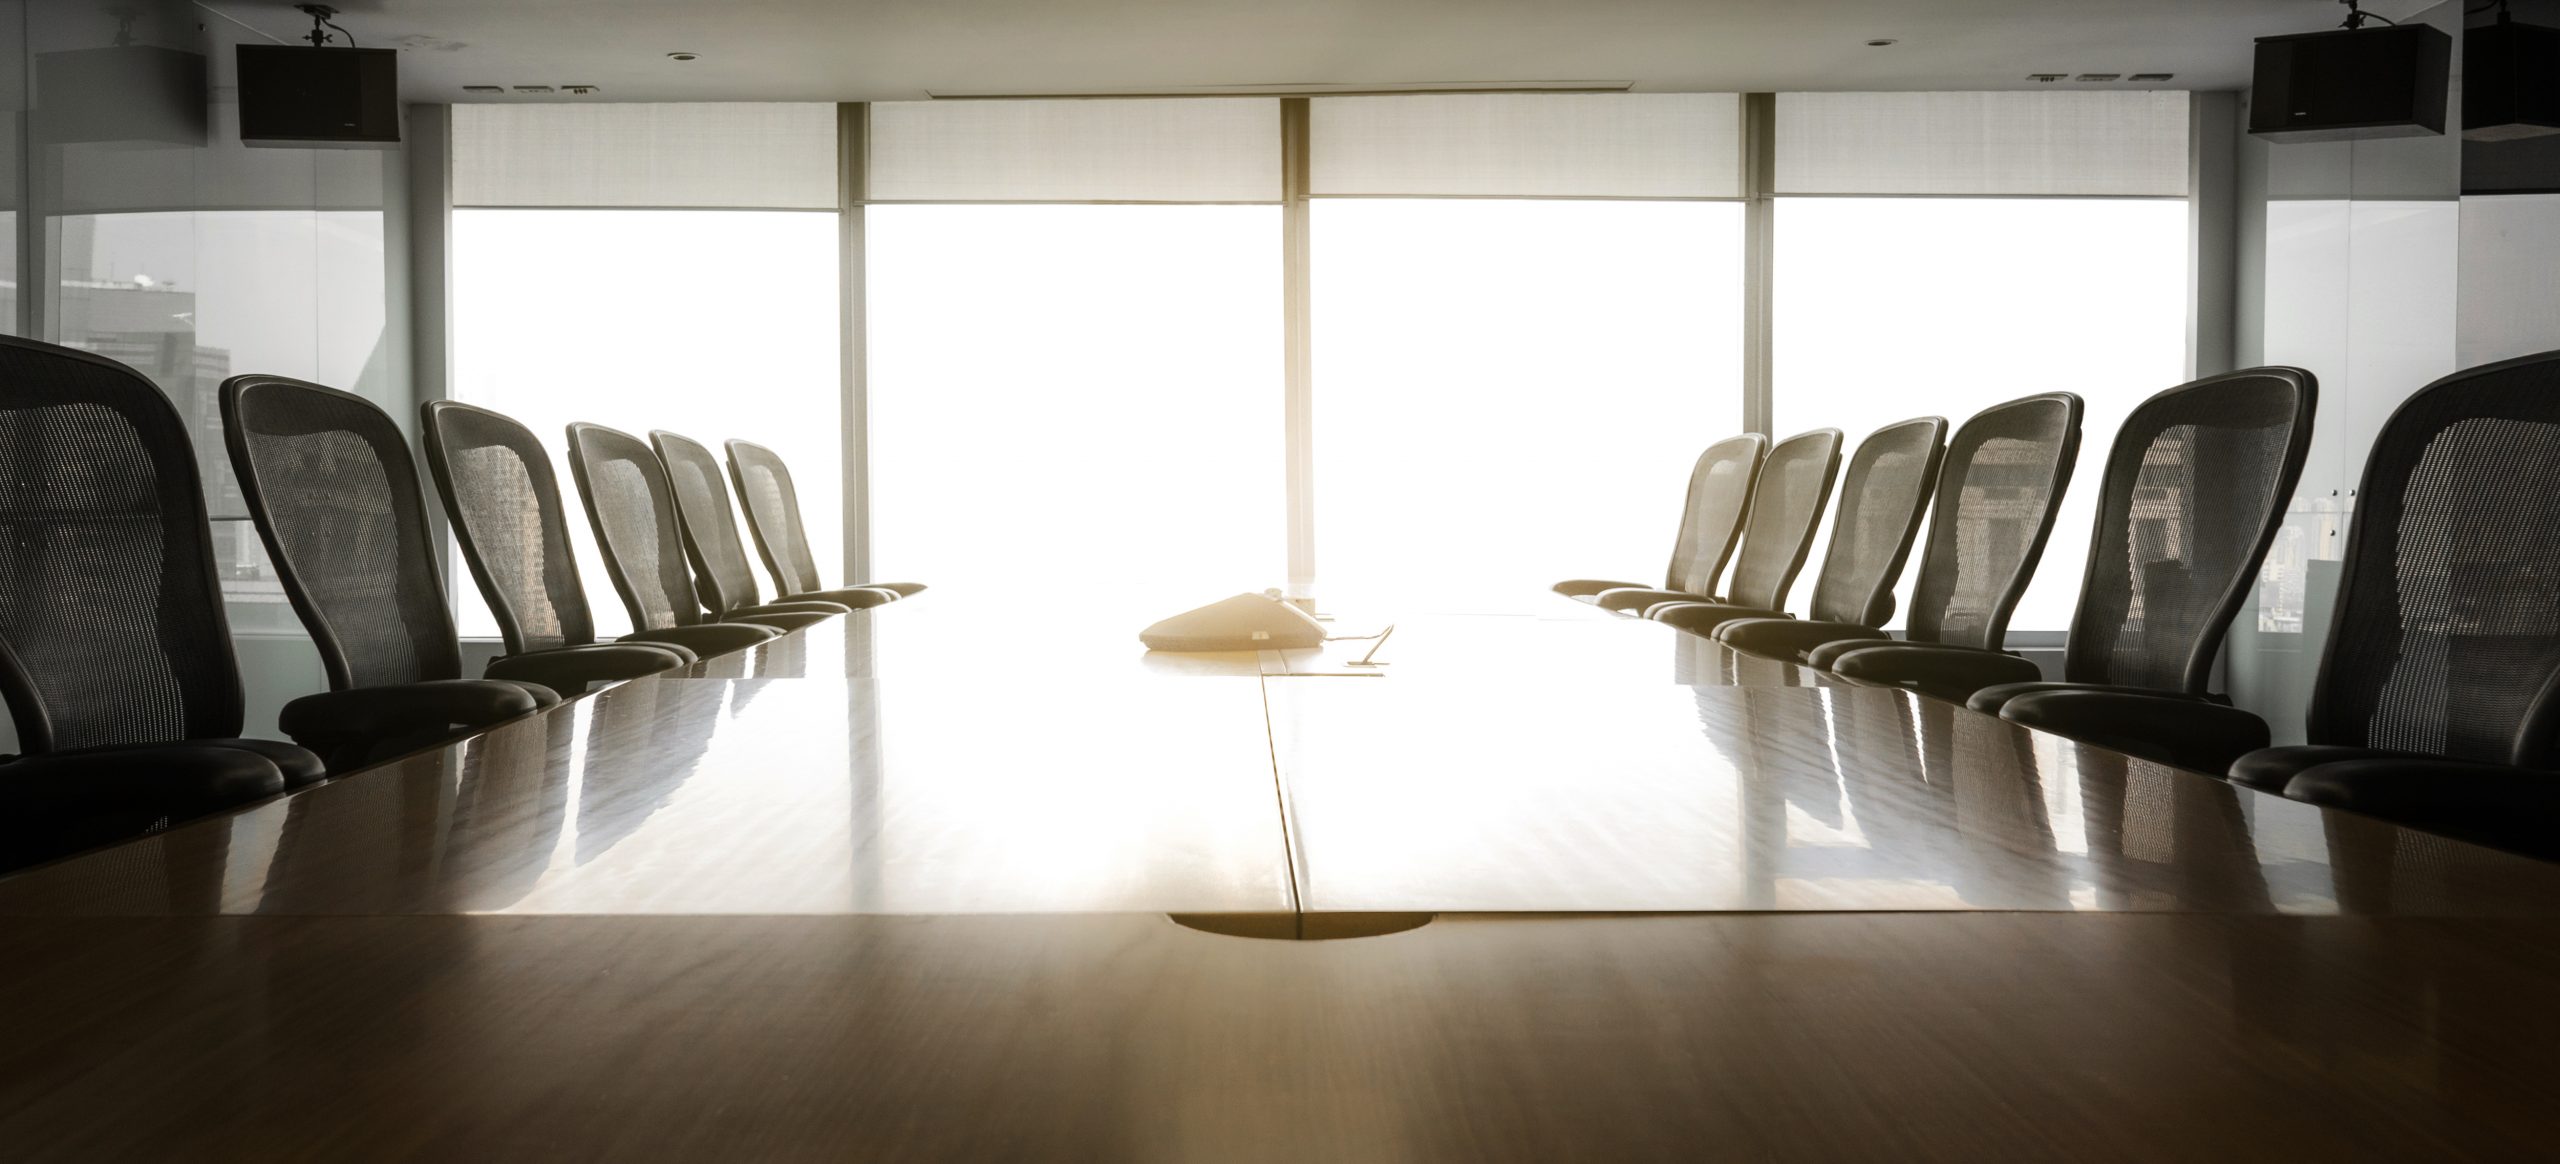 Your Questions Answered: Financial Best Practices For Your Board